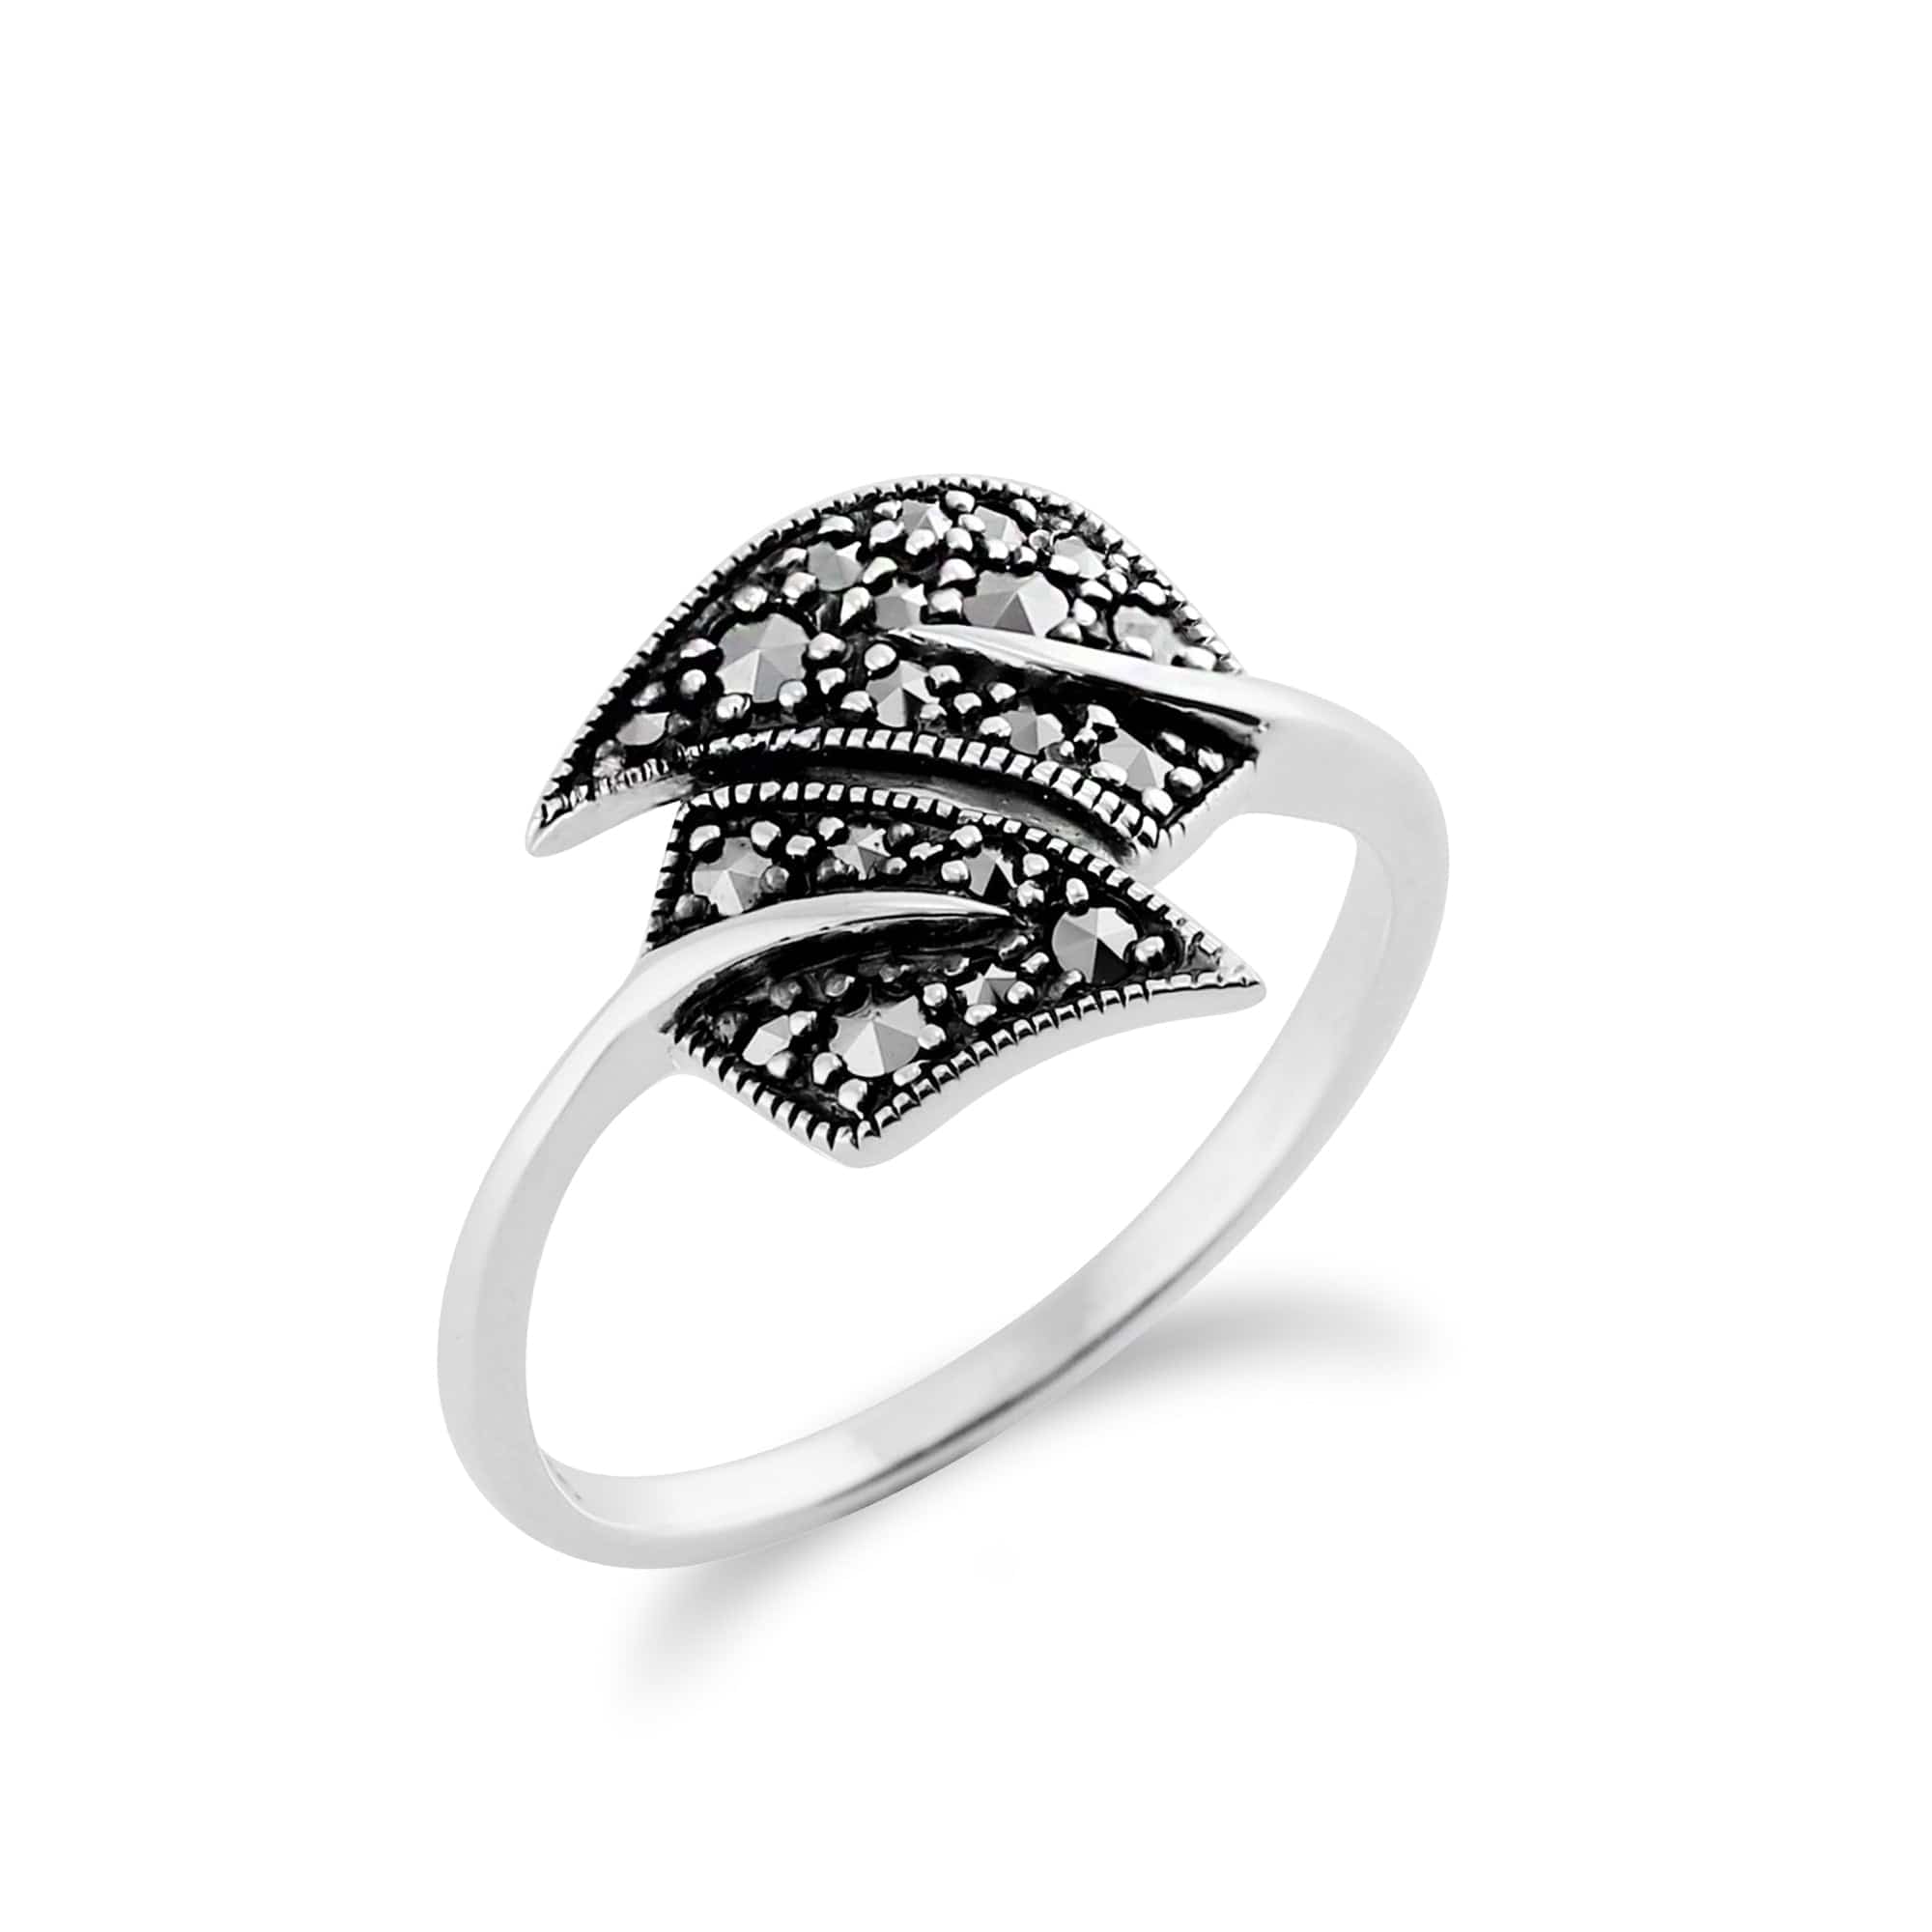 214R503601925 Art Nouveau Style Round Marcasite Leaf Wrap Ring in 925 Sterling Silver 2